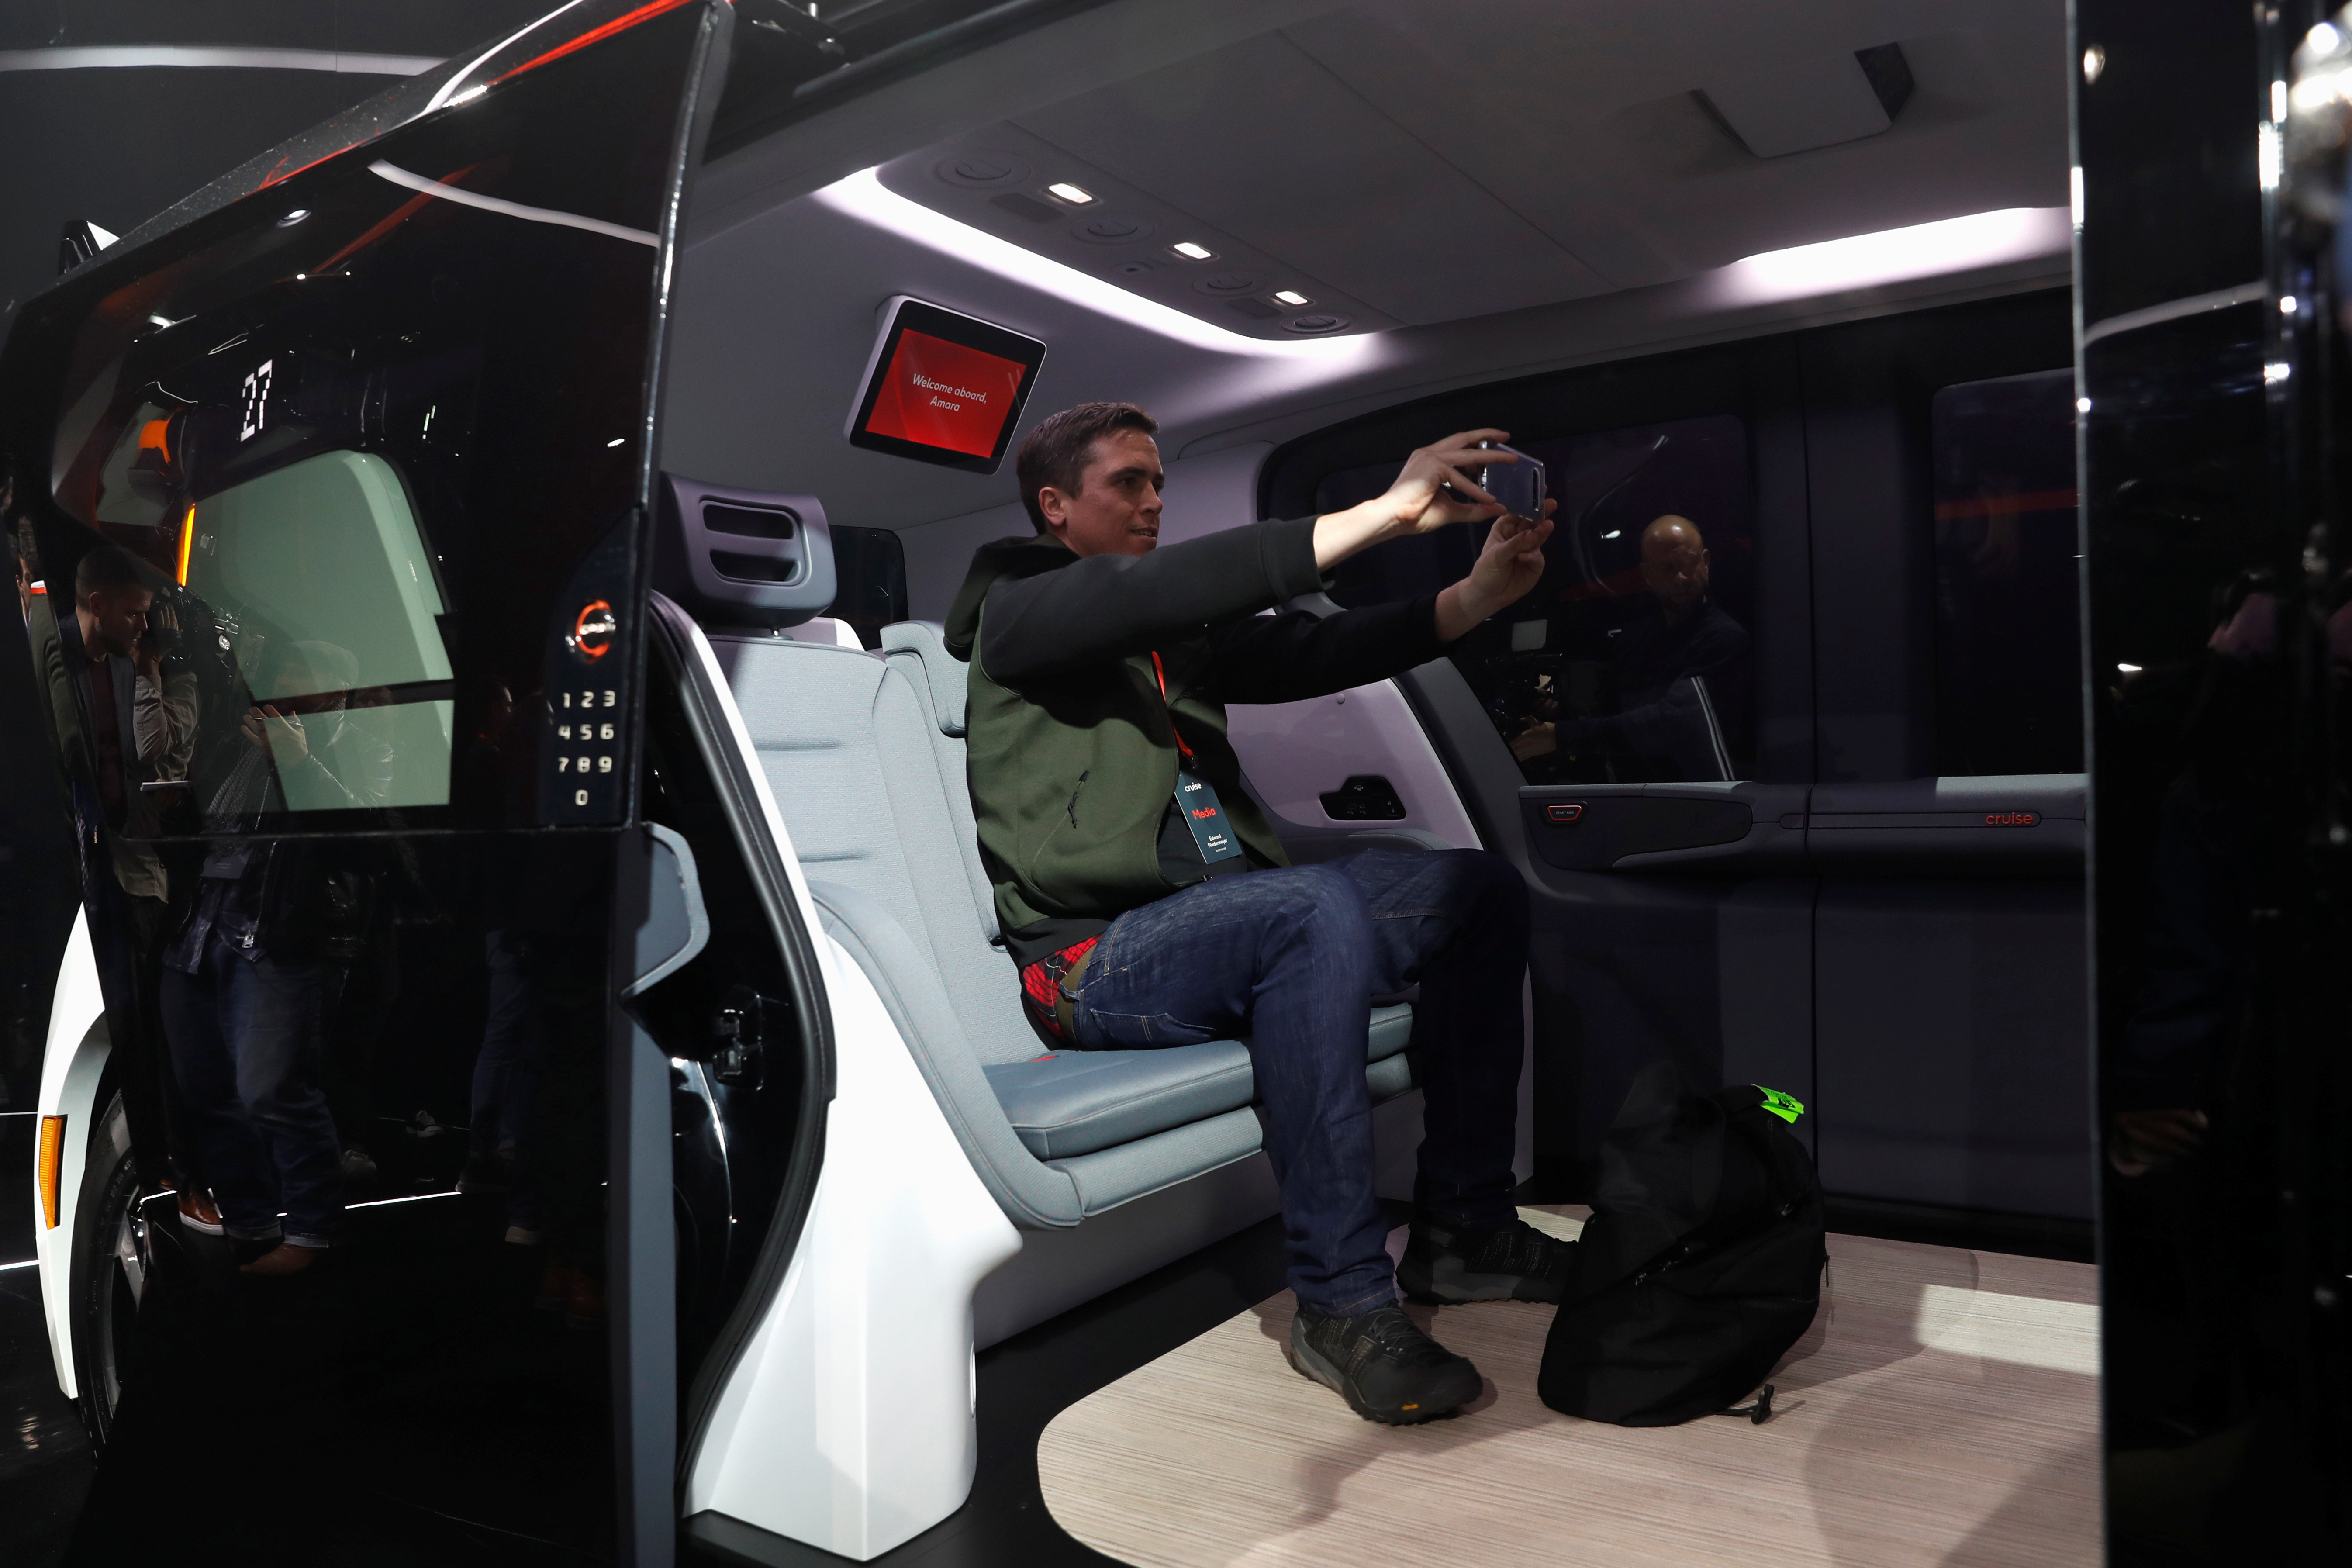 An attendee takes a selfie inside a Cruise Origin autonomous vehicle during its unveiling in San Francisco